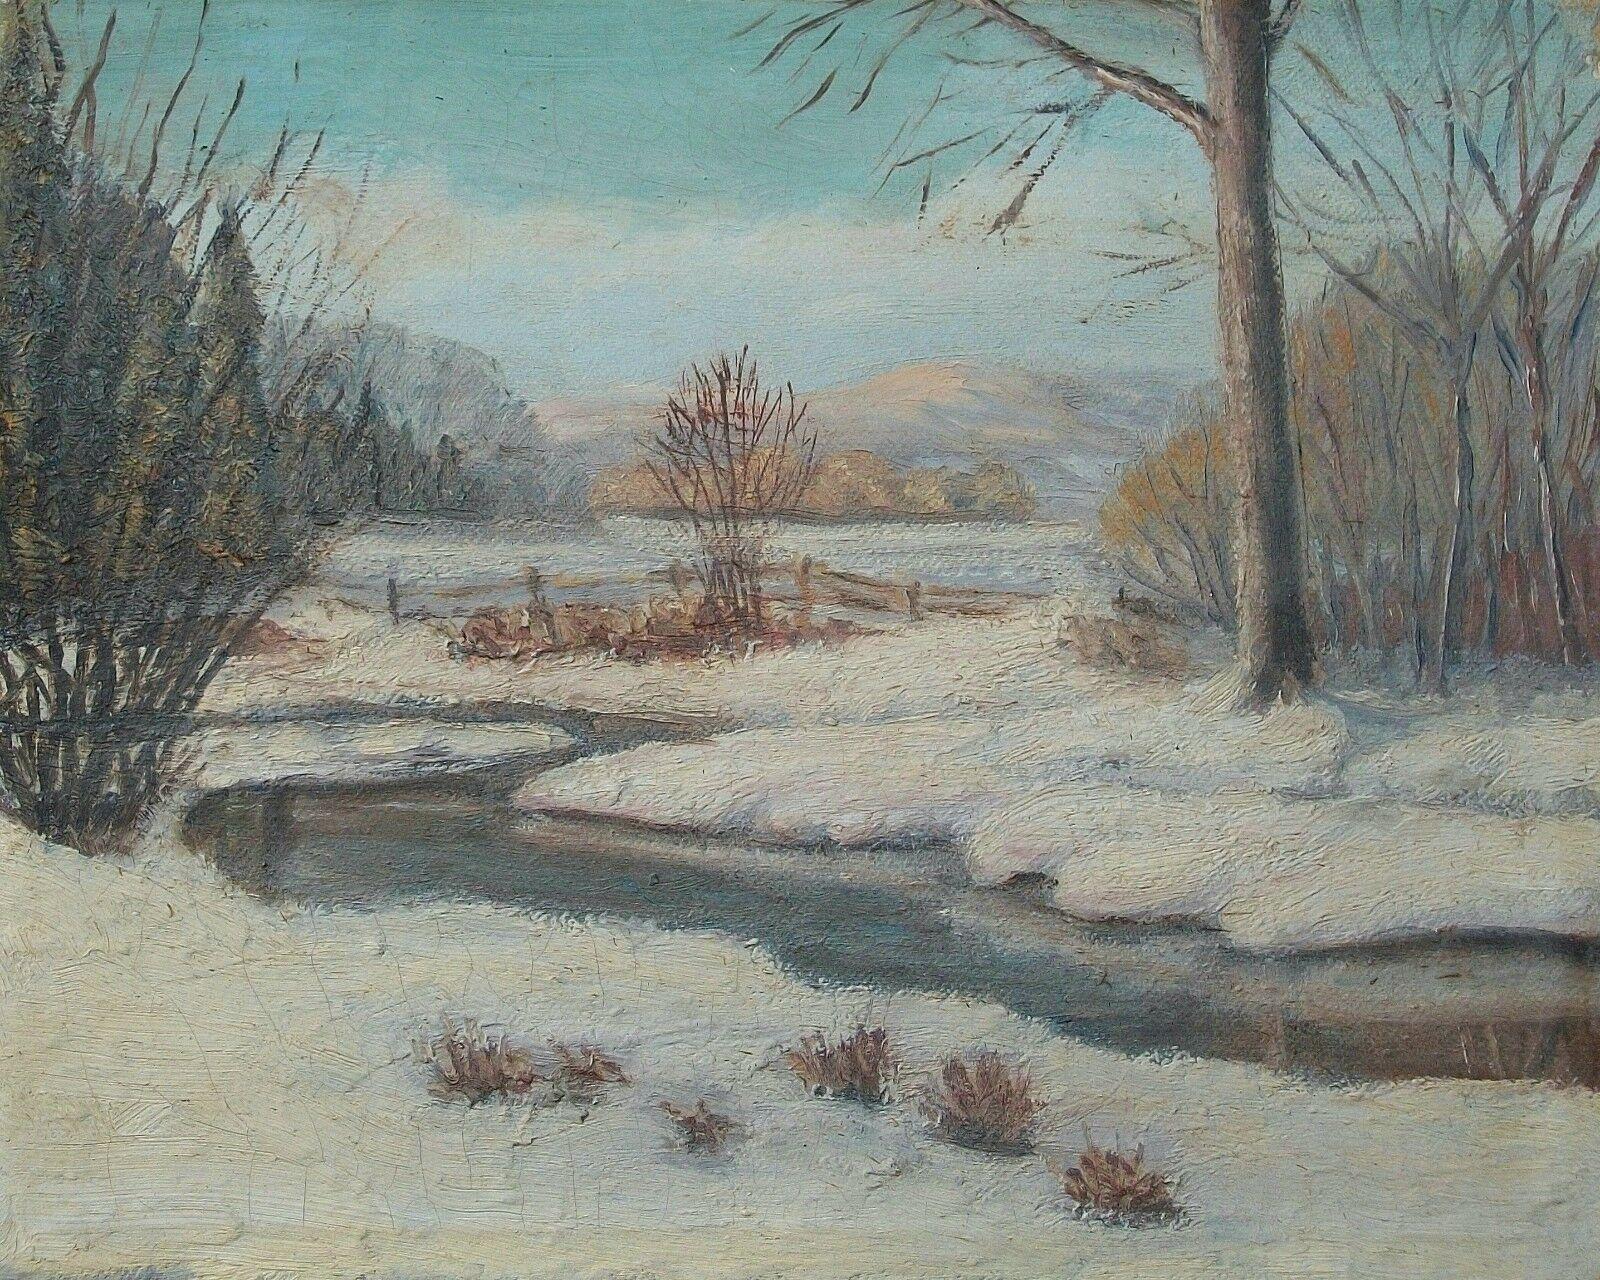 Antique Canadian school 'winter landscape with stream' oil painting on artist's board/panel - original pine frame with gilt and painted finish - unsigned/untitled (pencil note on frame - Johnson) - Canada - early 20th century. 

Excellent antique